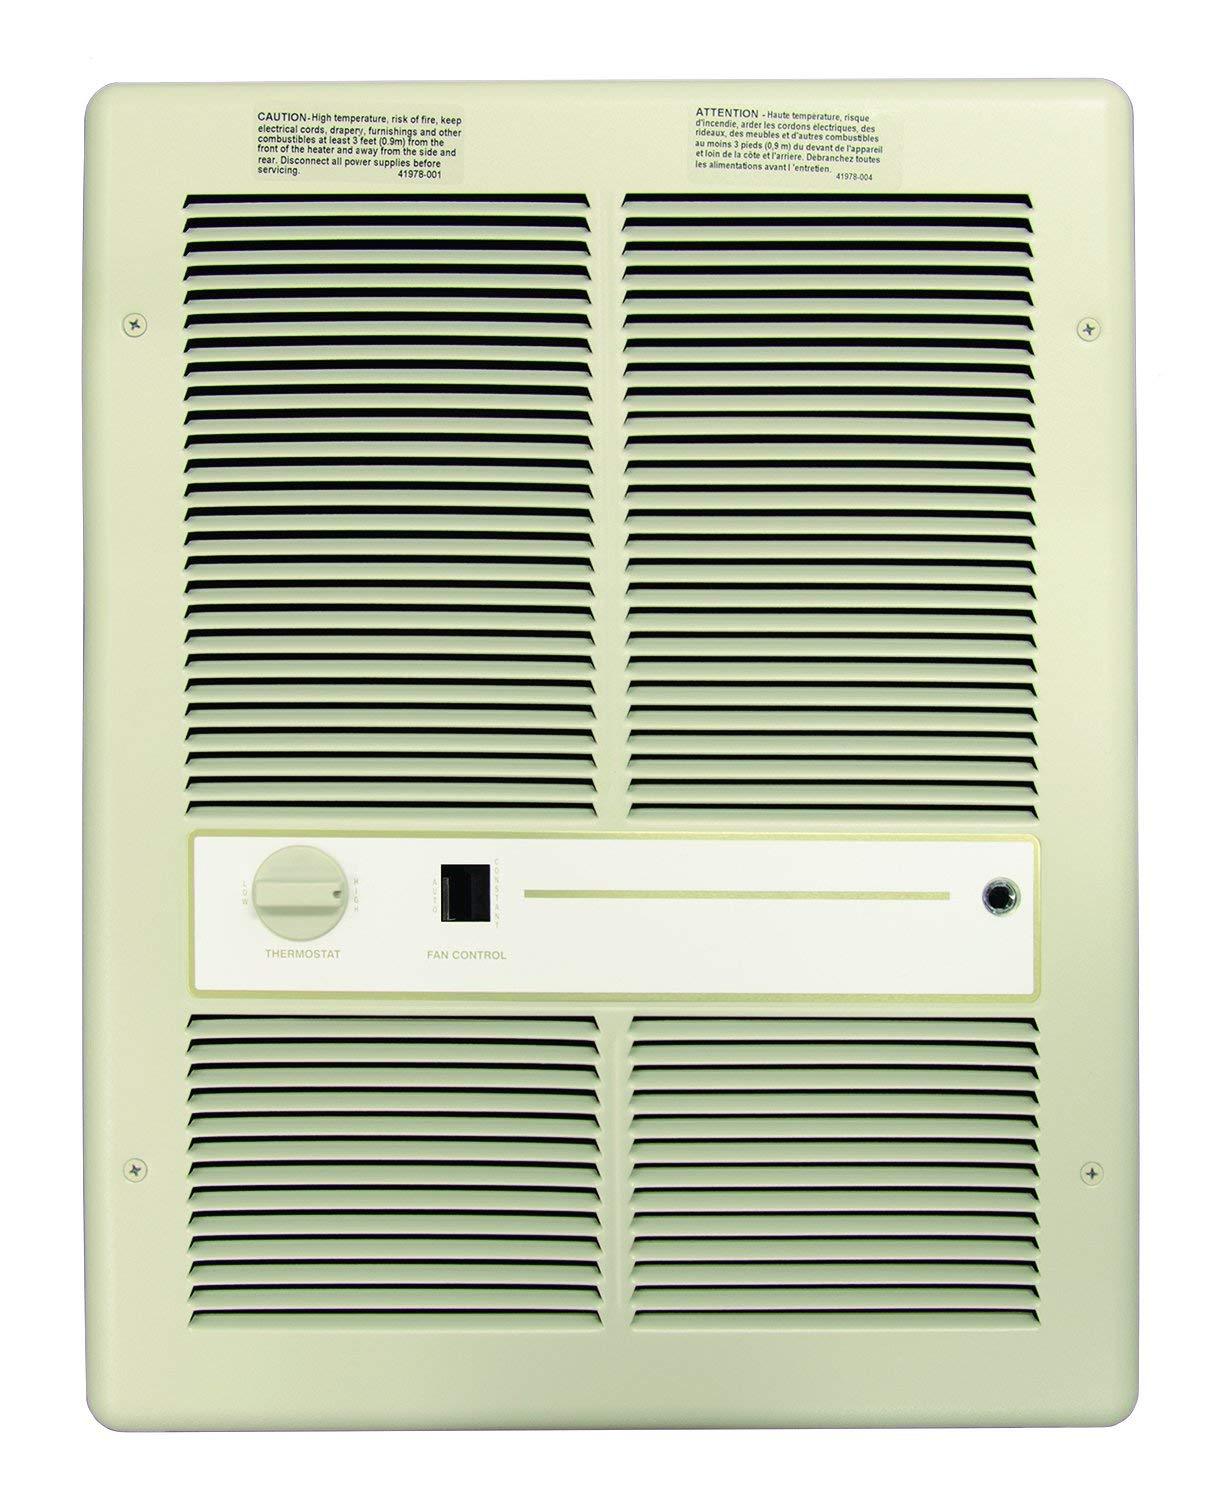 TPI 3000W 277V 3310 Series Fan Forced Wall Heater (White) - Without Summer Fan Switch - No Thermostat - G3315RPW